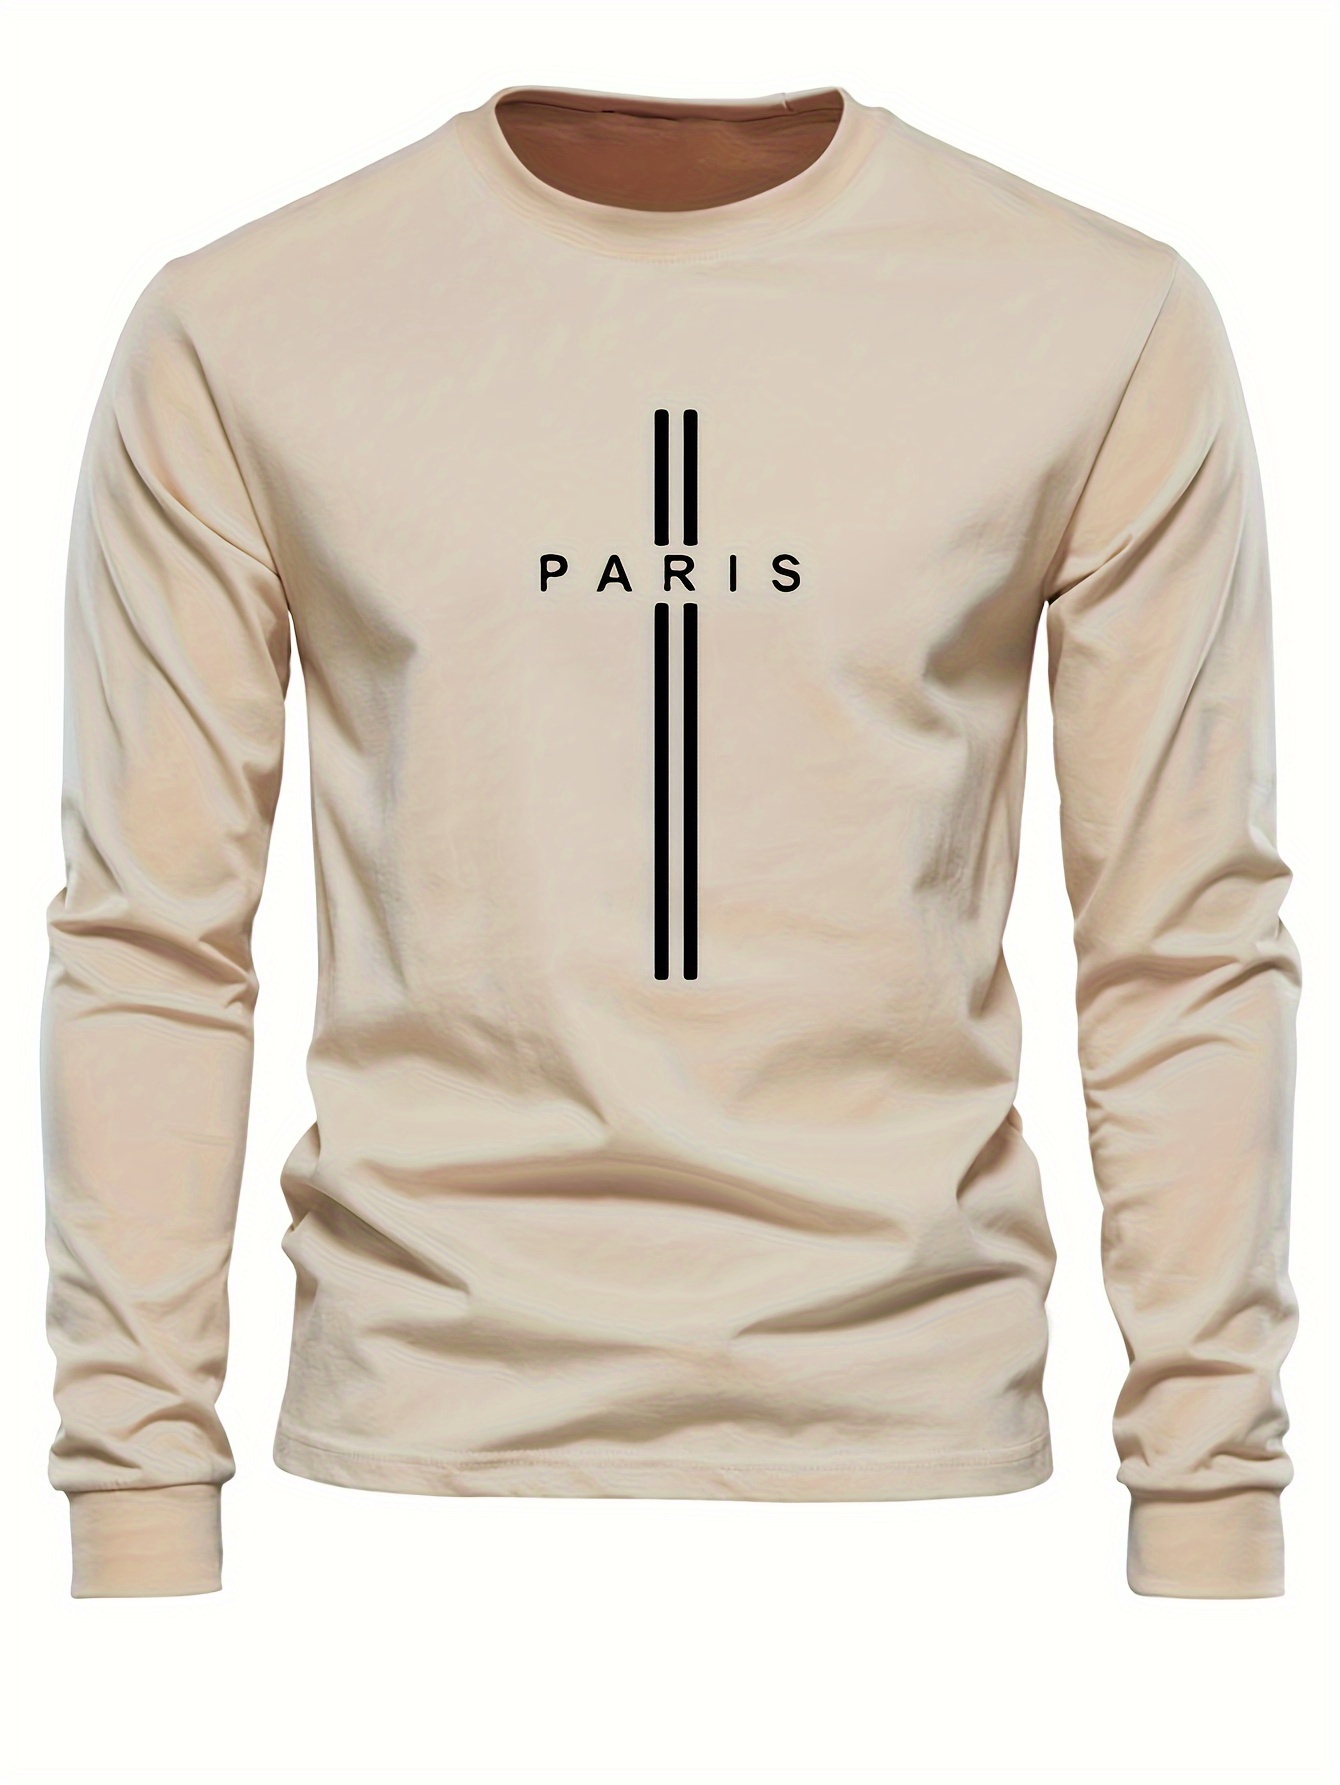 paris print mens graphic design crew neck long sleeve active t shirt tee casual comfy shirts for spring summer autumn mens clothing tops details 3